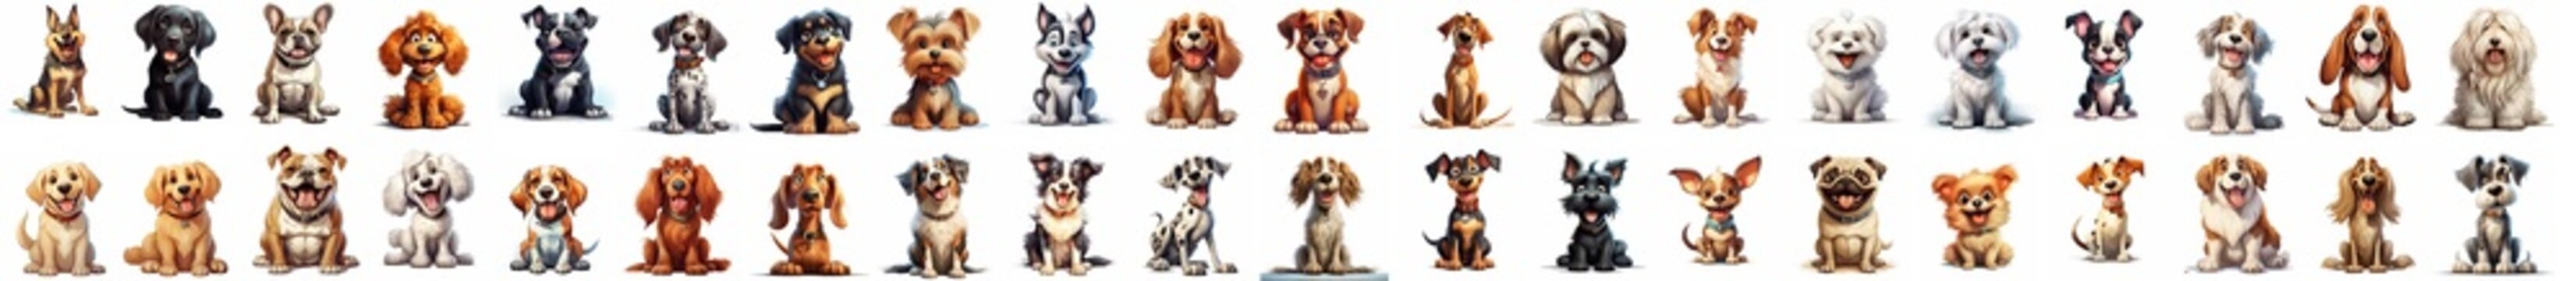 40 cute cartoon dogs in a sitting position